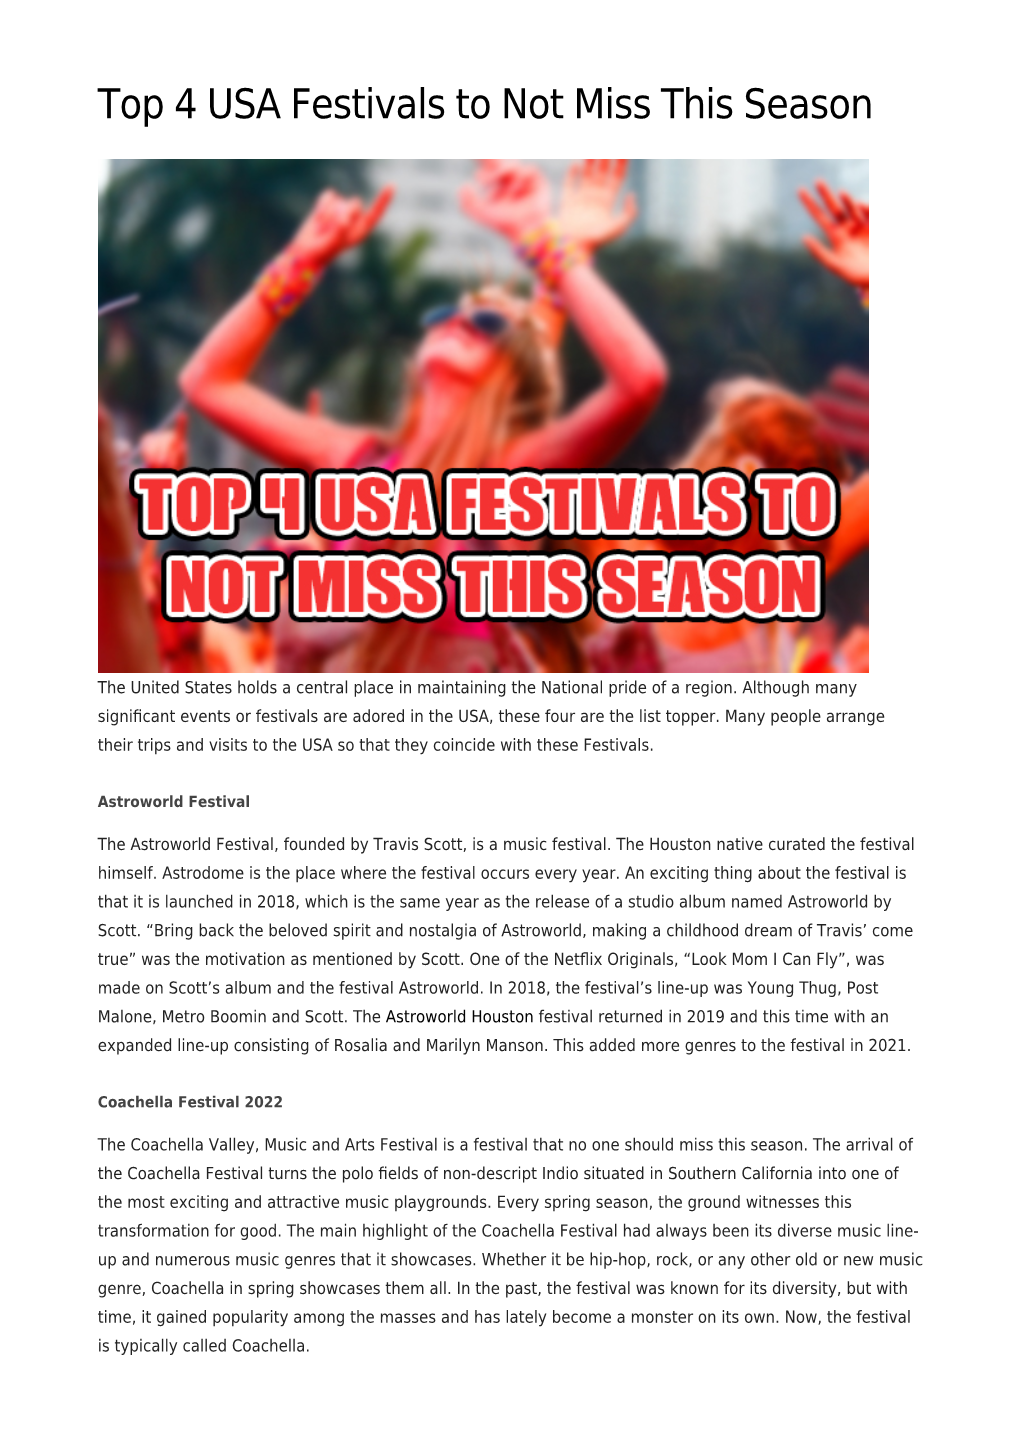 Top 4 USA Festivals to Not Miss This Season